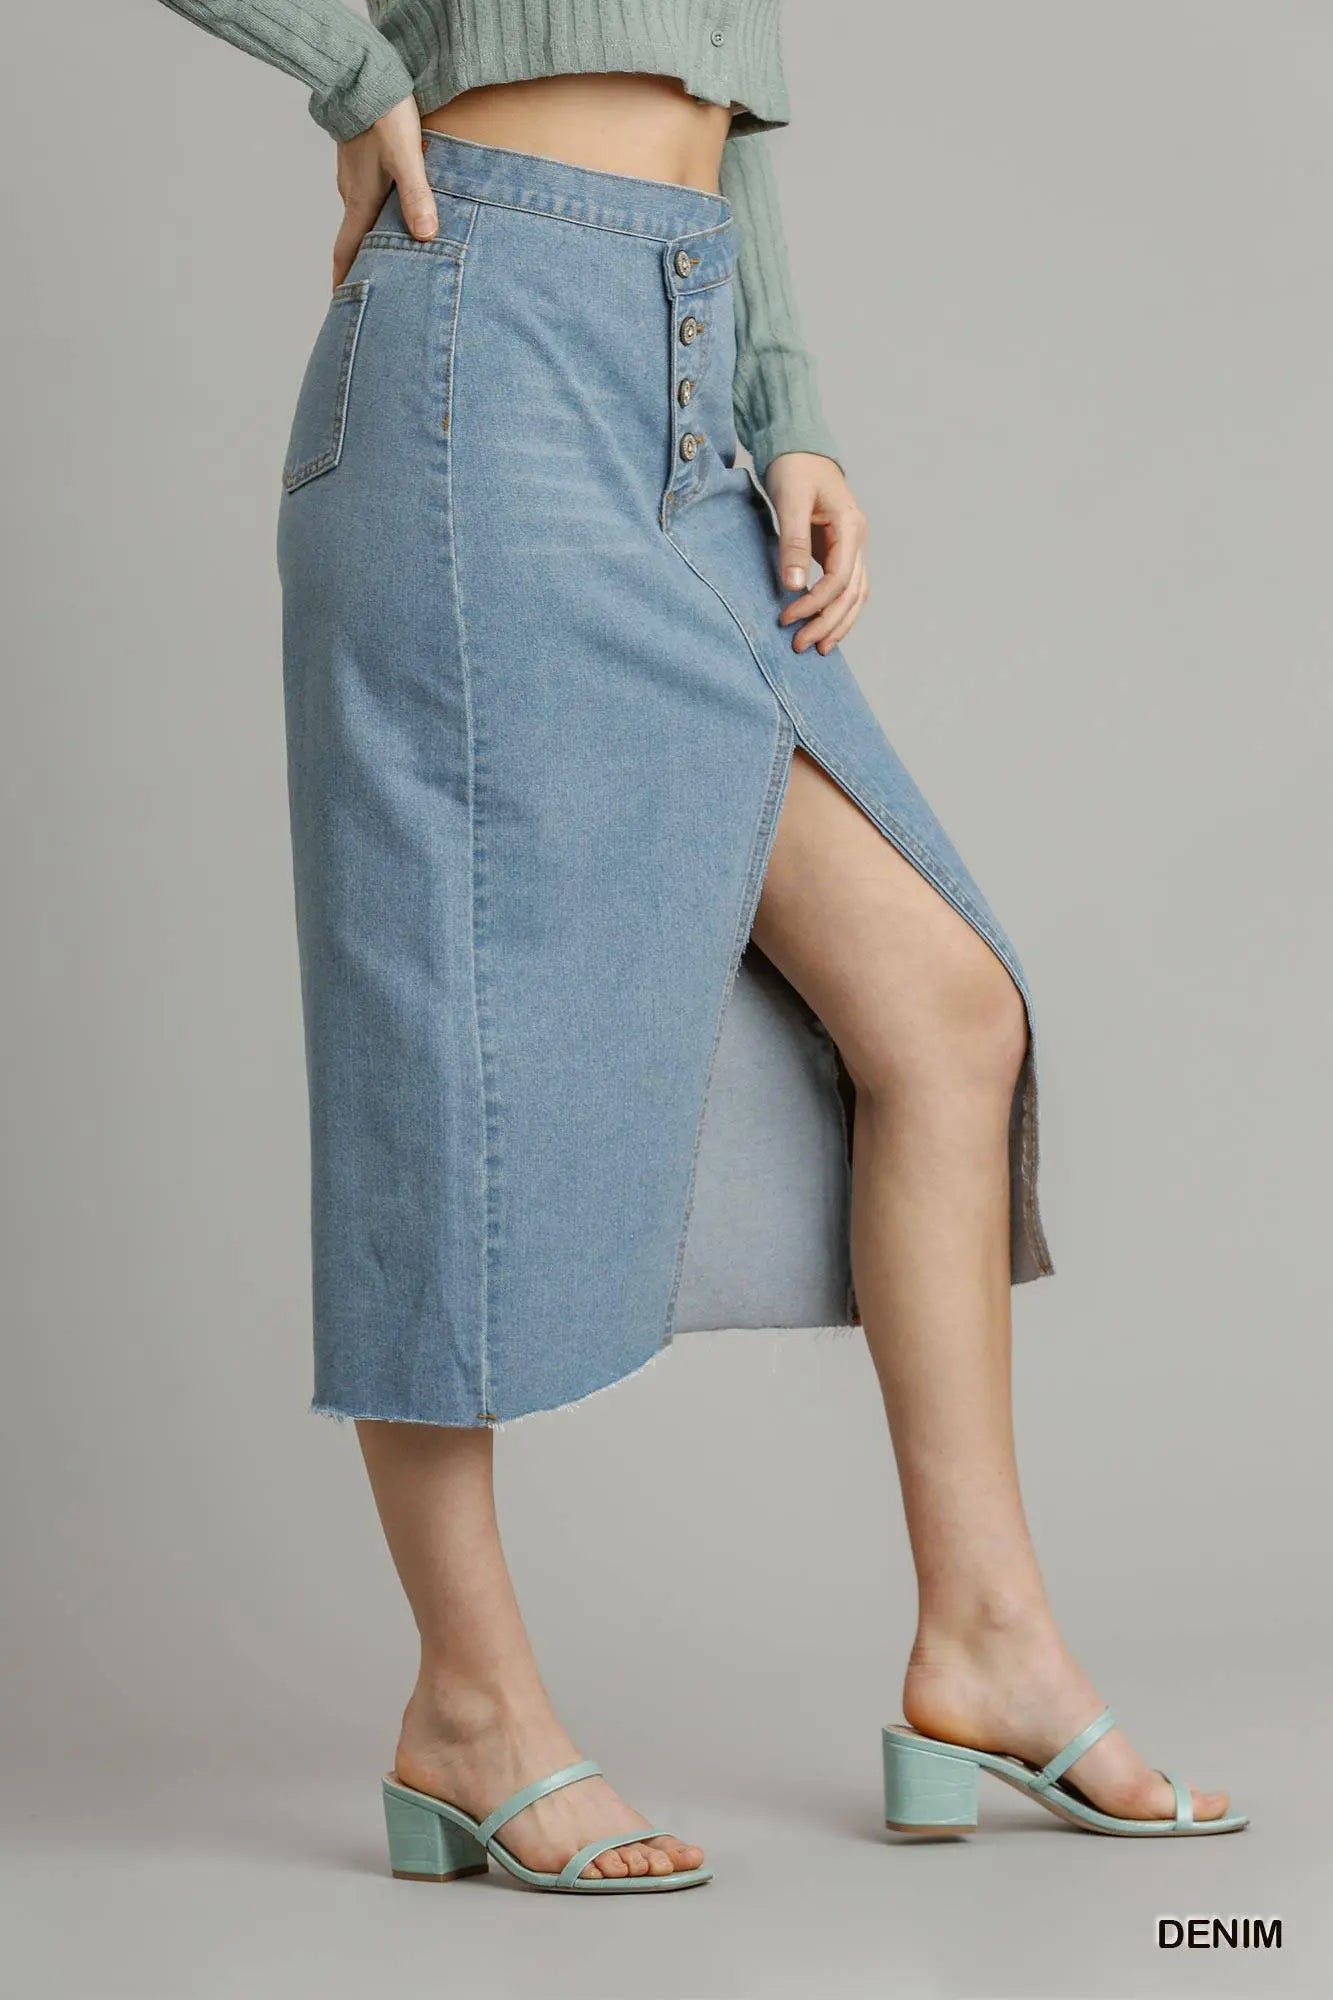 Asymmetrical Waist And Button Up Front Split Denim Skirt With Back Pockets And Unfinished Hem Sunny EvE Fashion